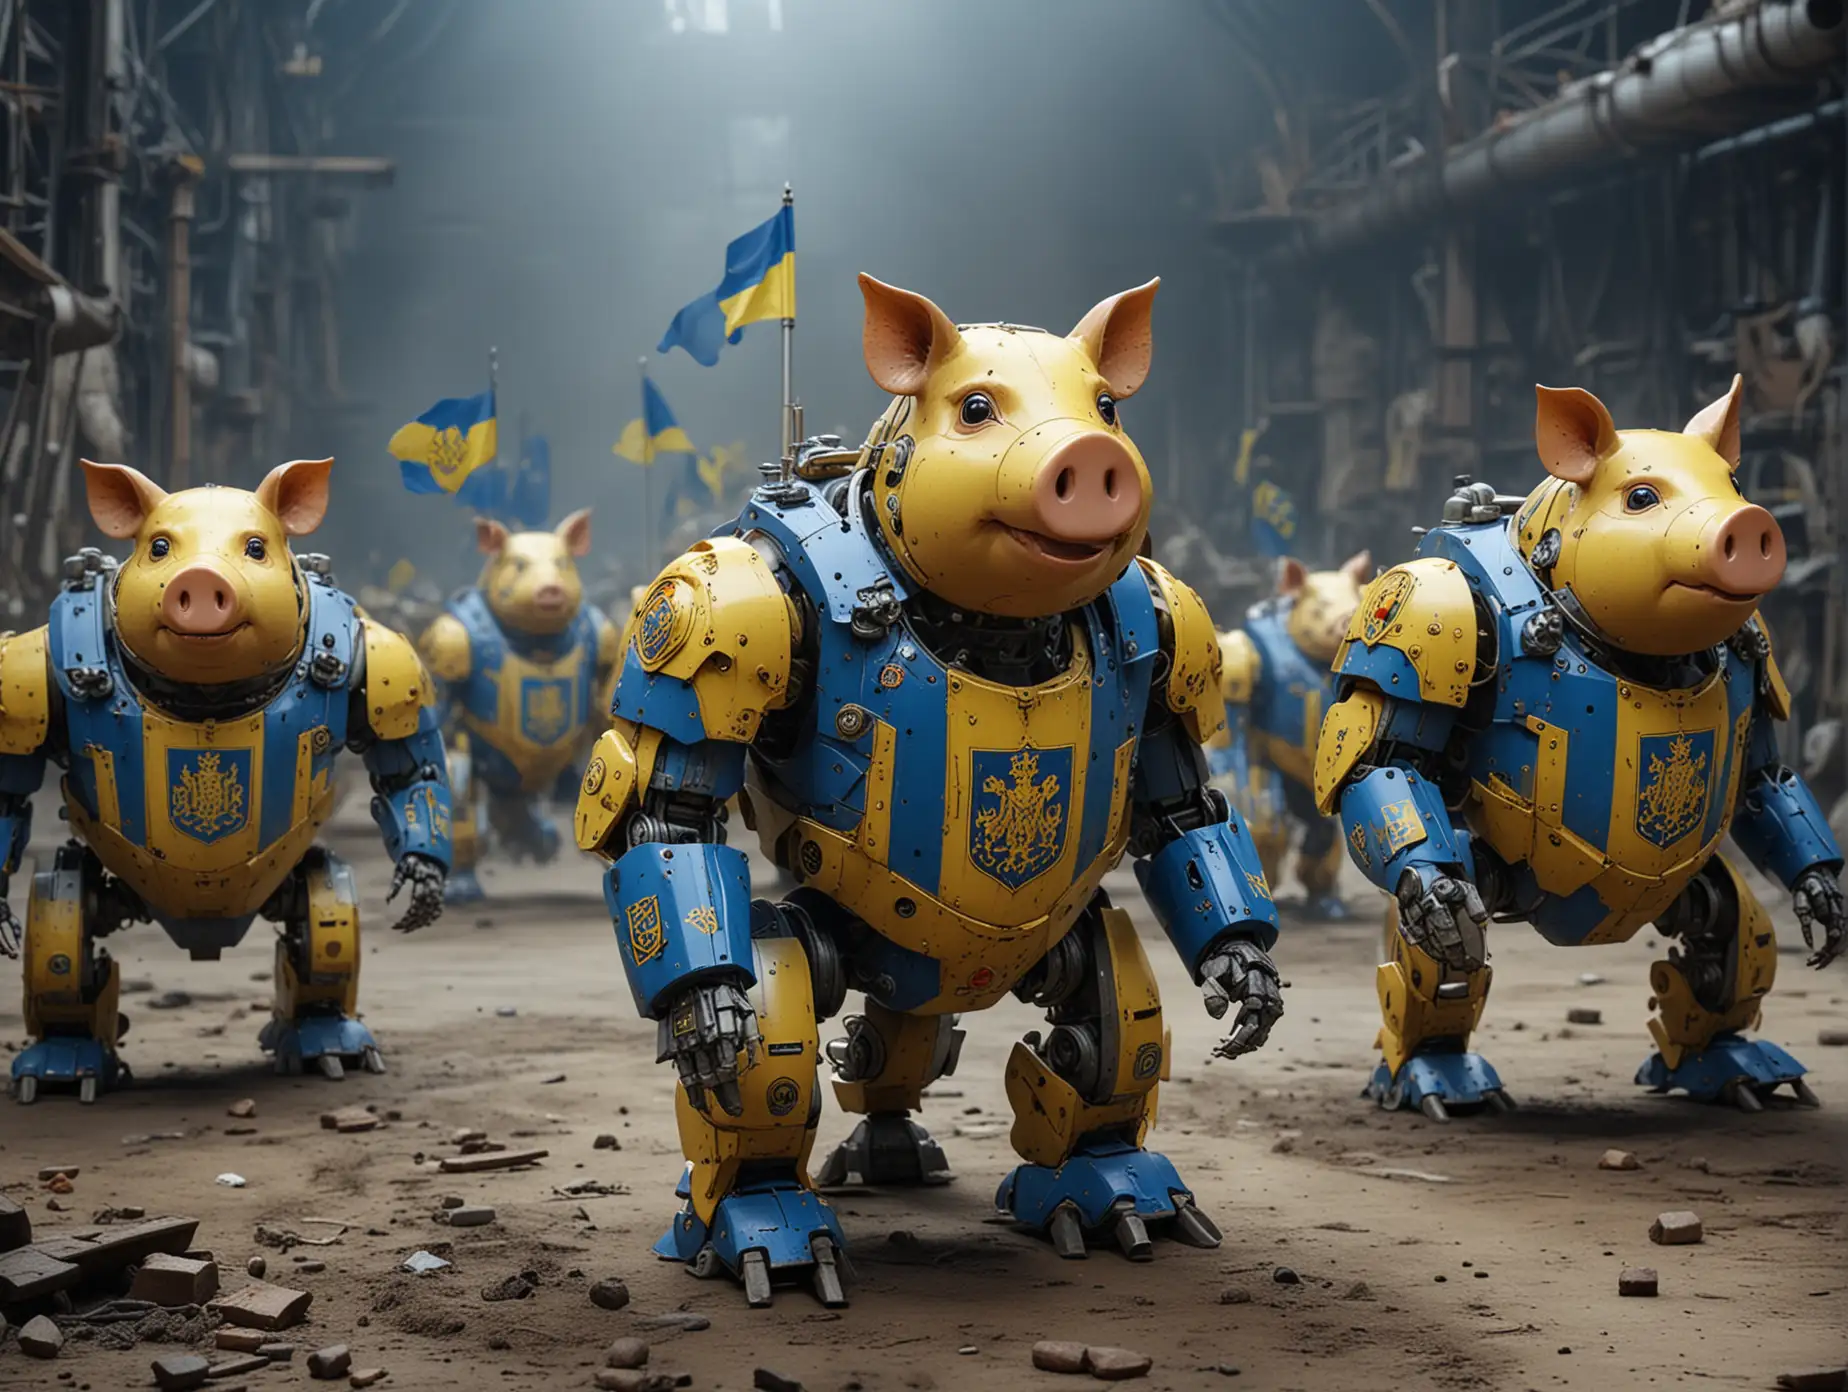 Fantasy-Battle-Robot-Pigs-with-Ukraine-Coats-of-Arms-in-Factory-Production